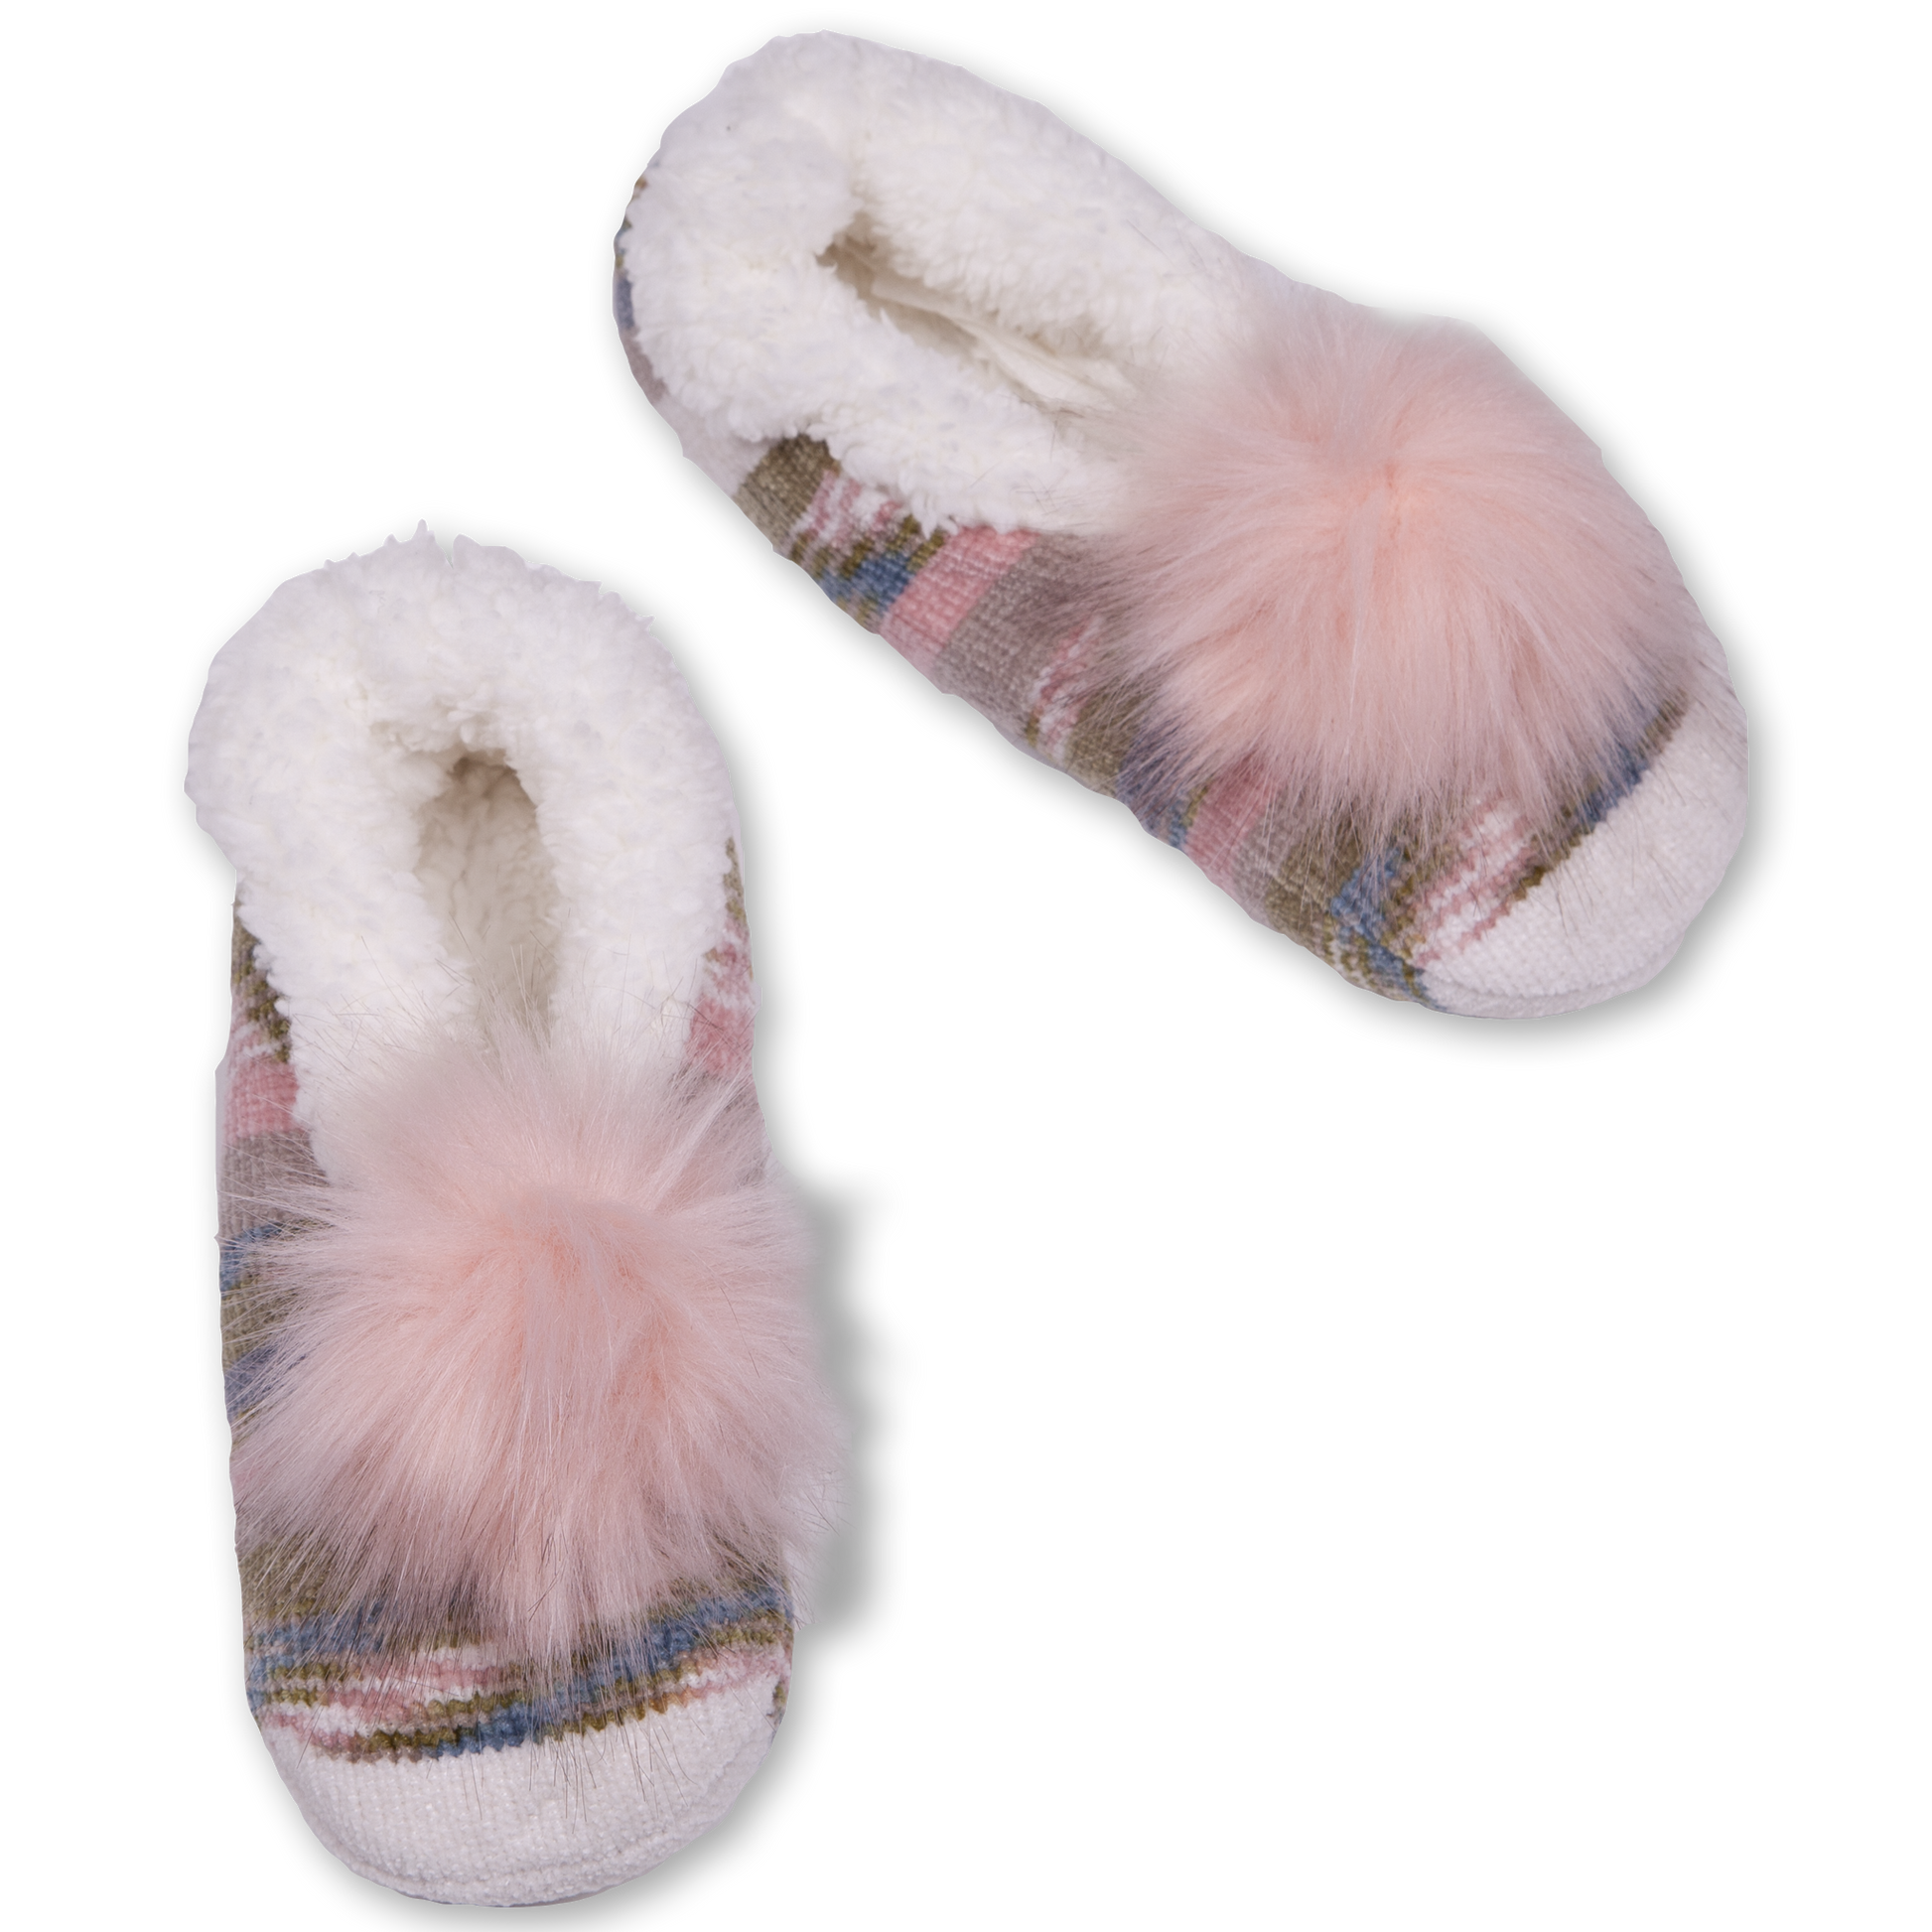 Baby Girls Sherpa Slipper Socks with Grippers Pink Dot